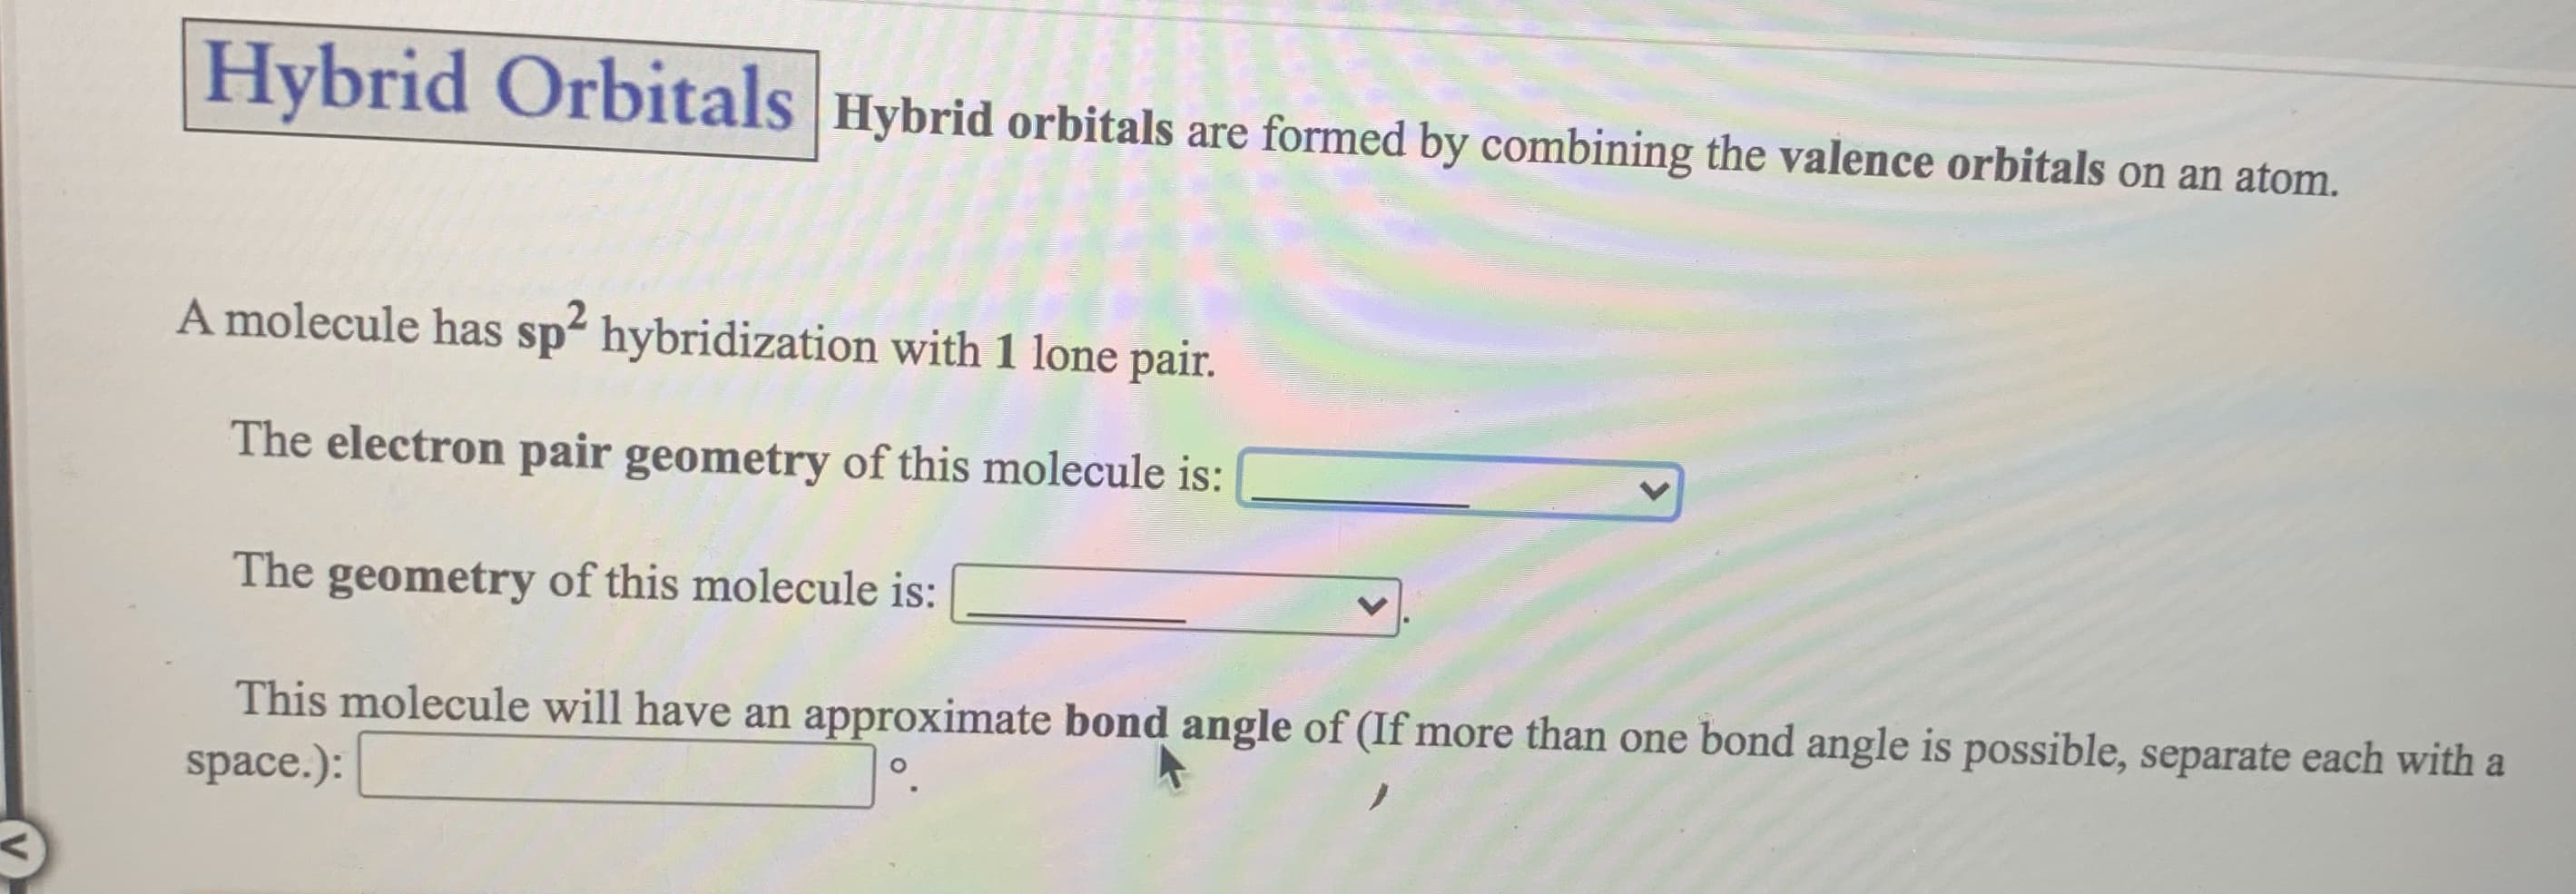 A molecule has sp hybridization with 1 lone pair.
The electron pair geometry of this molecule is:
The geometry of this molecule is:
This molecule will have an approximate bond angle of (If more than one bond angle is possible, separate each with a
space.):
